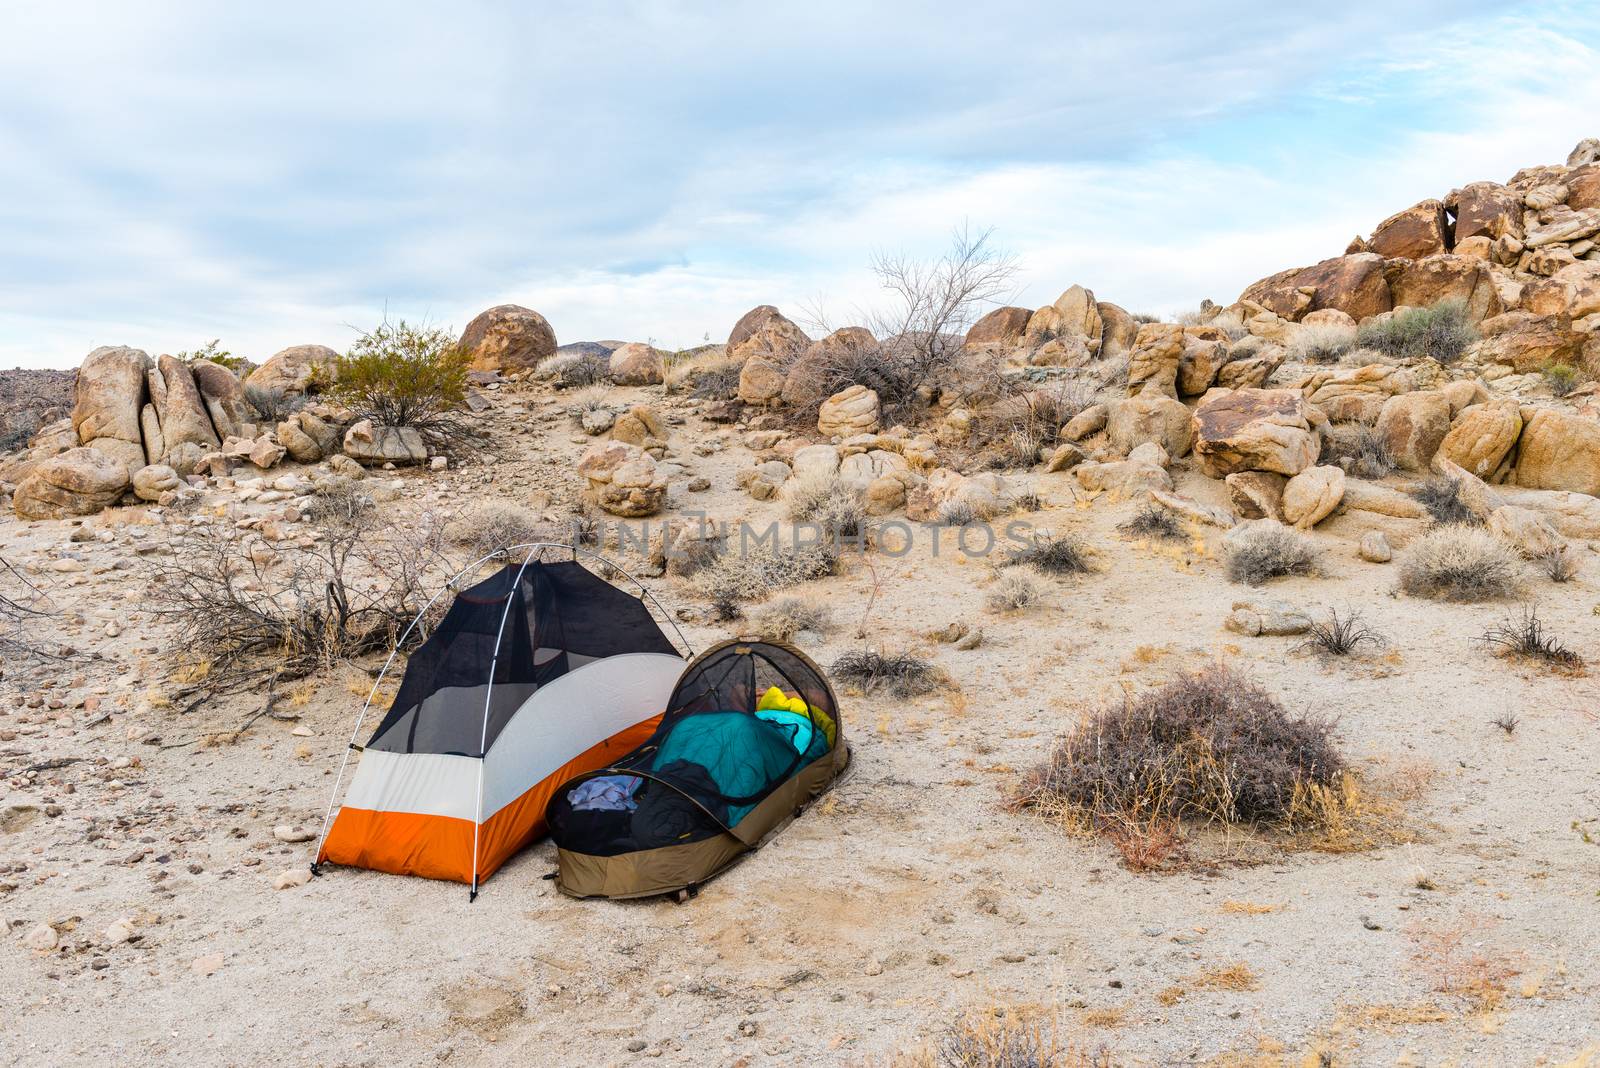 Backpacking tents in the Porcupine Wash wilderness area in Joshua Tree National Park, California